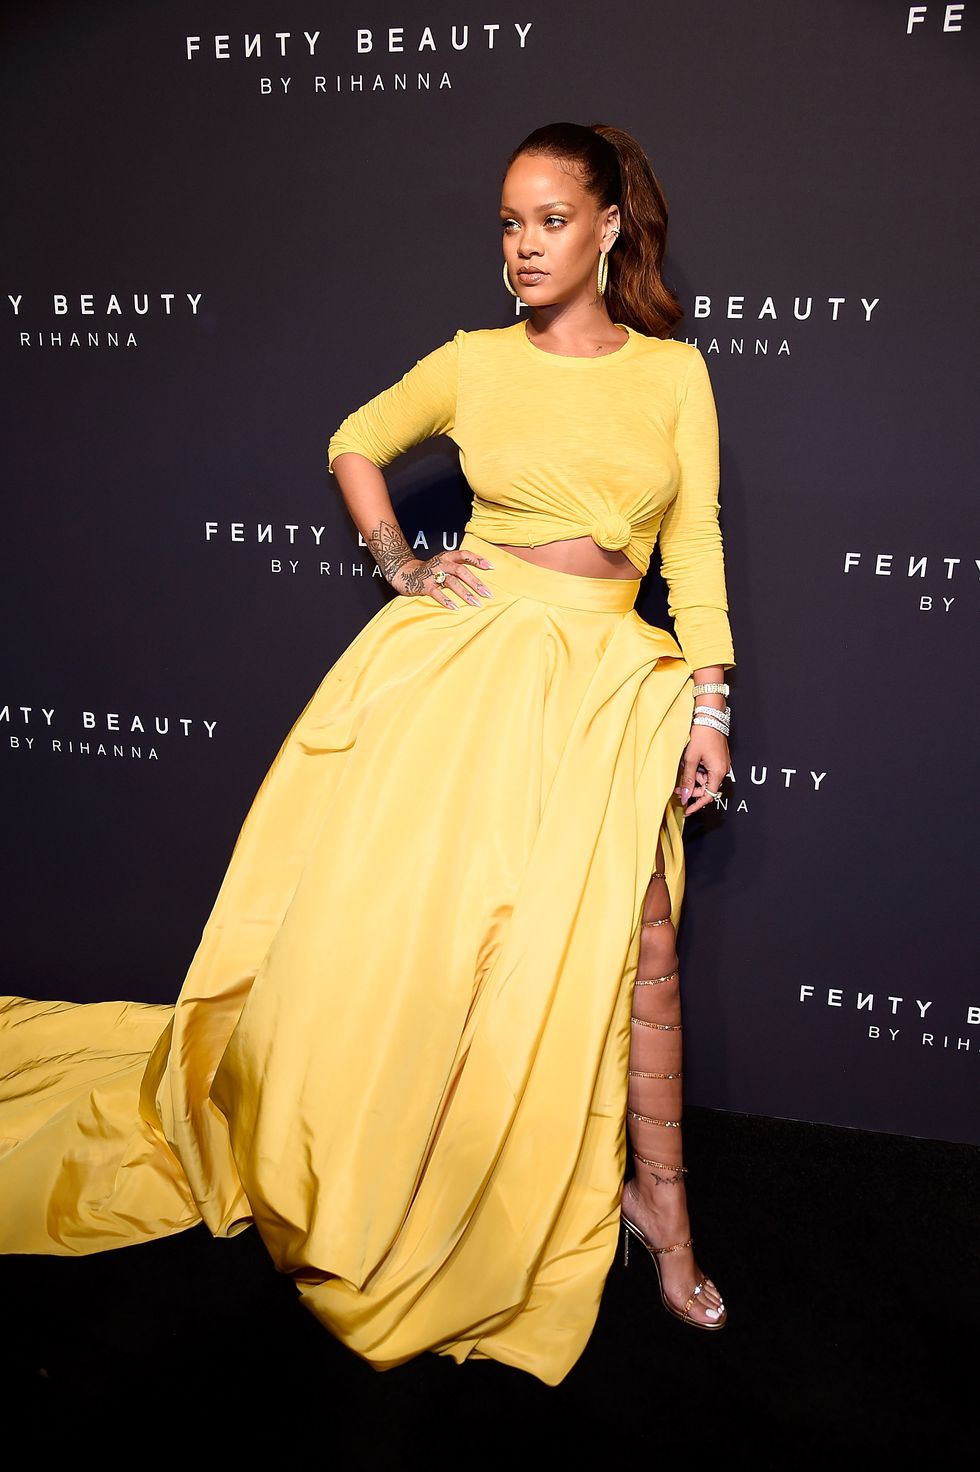 THE BROOKLYN BOROUGH OF NEW YORK, NEW YORK - SEPTEMBER 07:  Rihanna celebrates the launch of Fenty Beauty at Duggal Greenhouse on September 7, 2017 in the Brooklyn borough of New York City, New York.  (Photo by Kevin Mazur/Getty Images for Fenty Beauty )